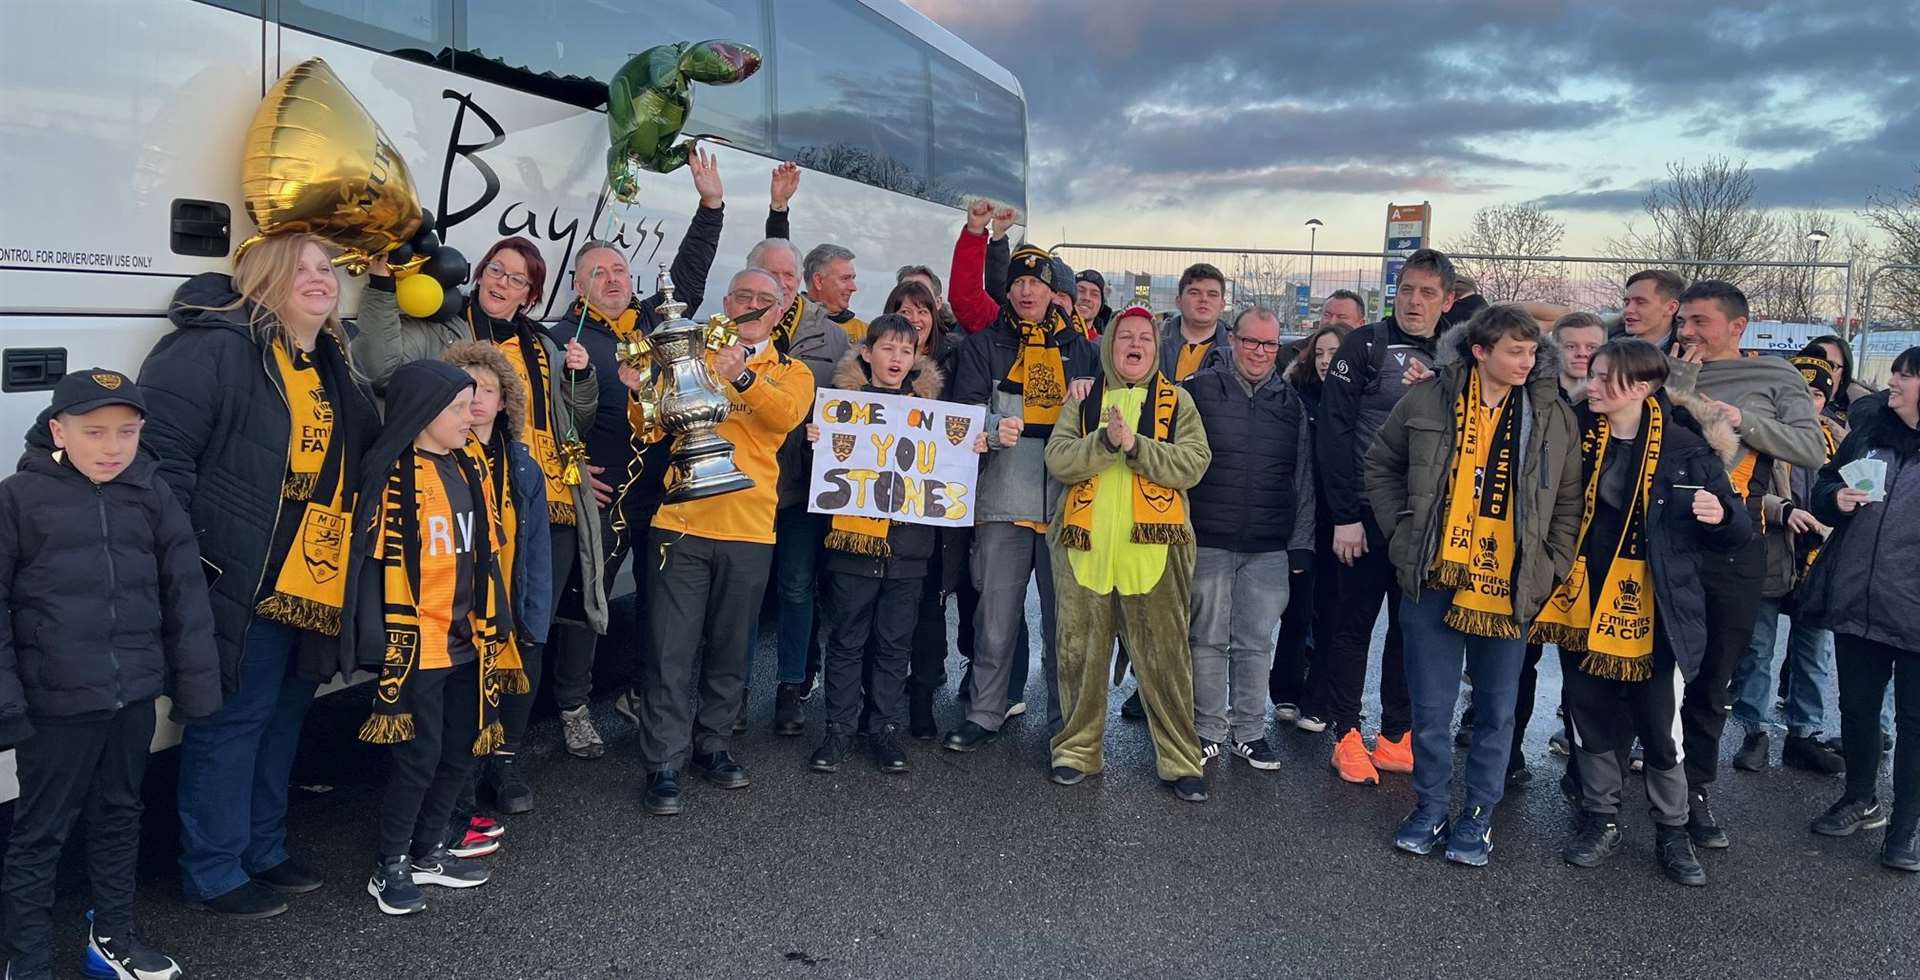 Maidstone fans arrive in Coventry ready for the big game.